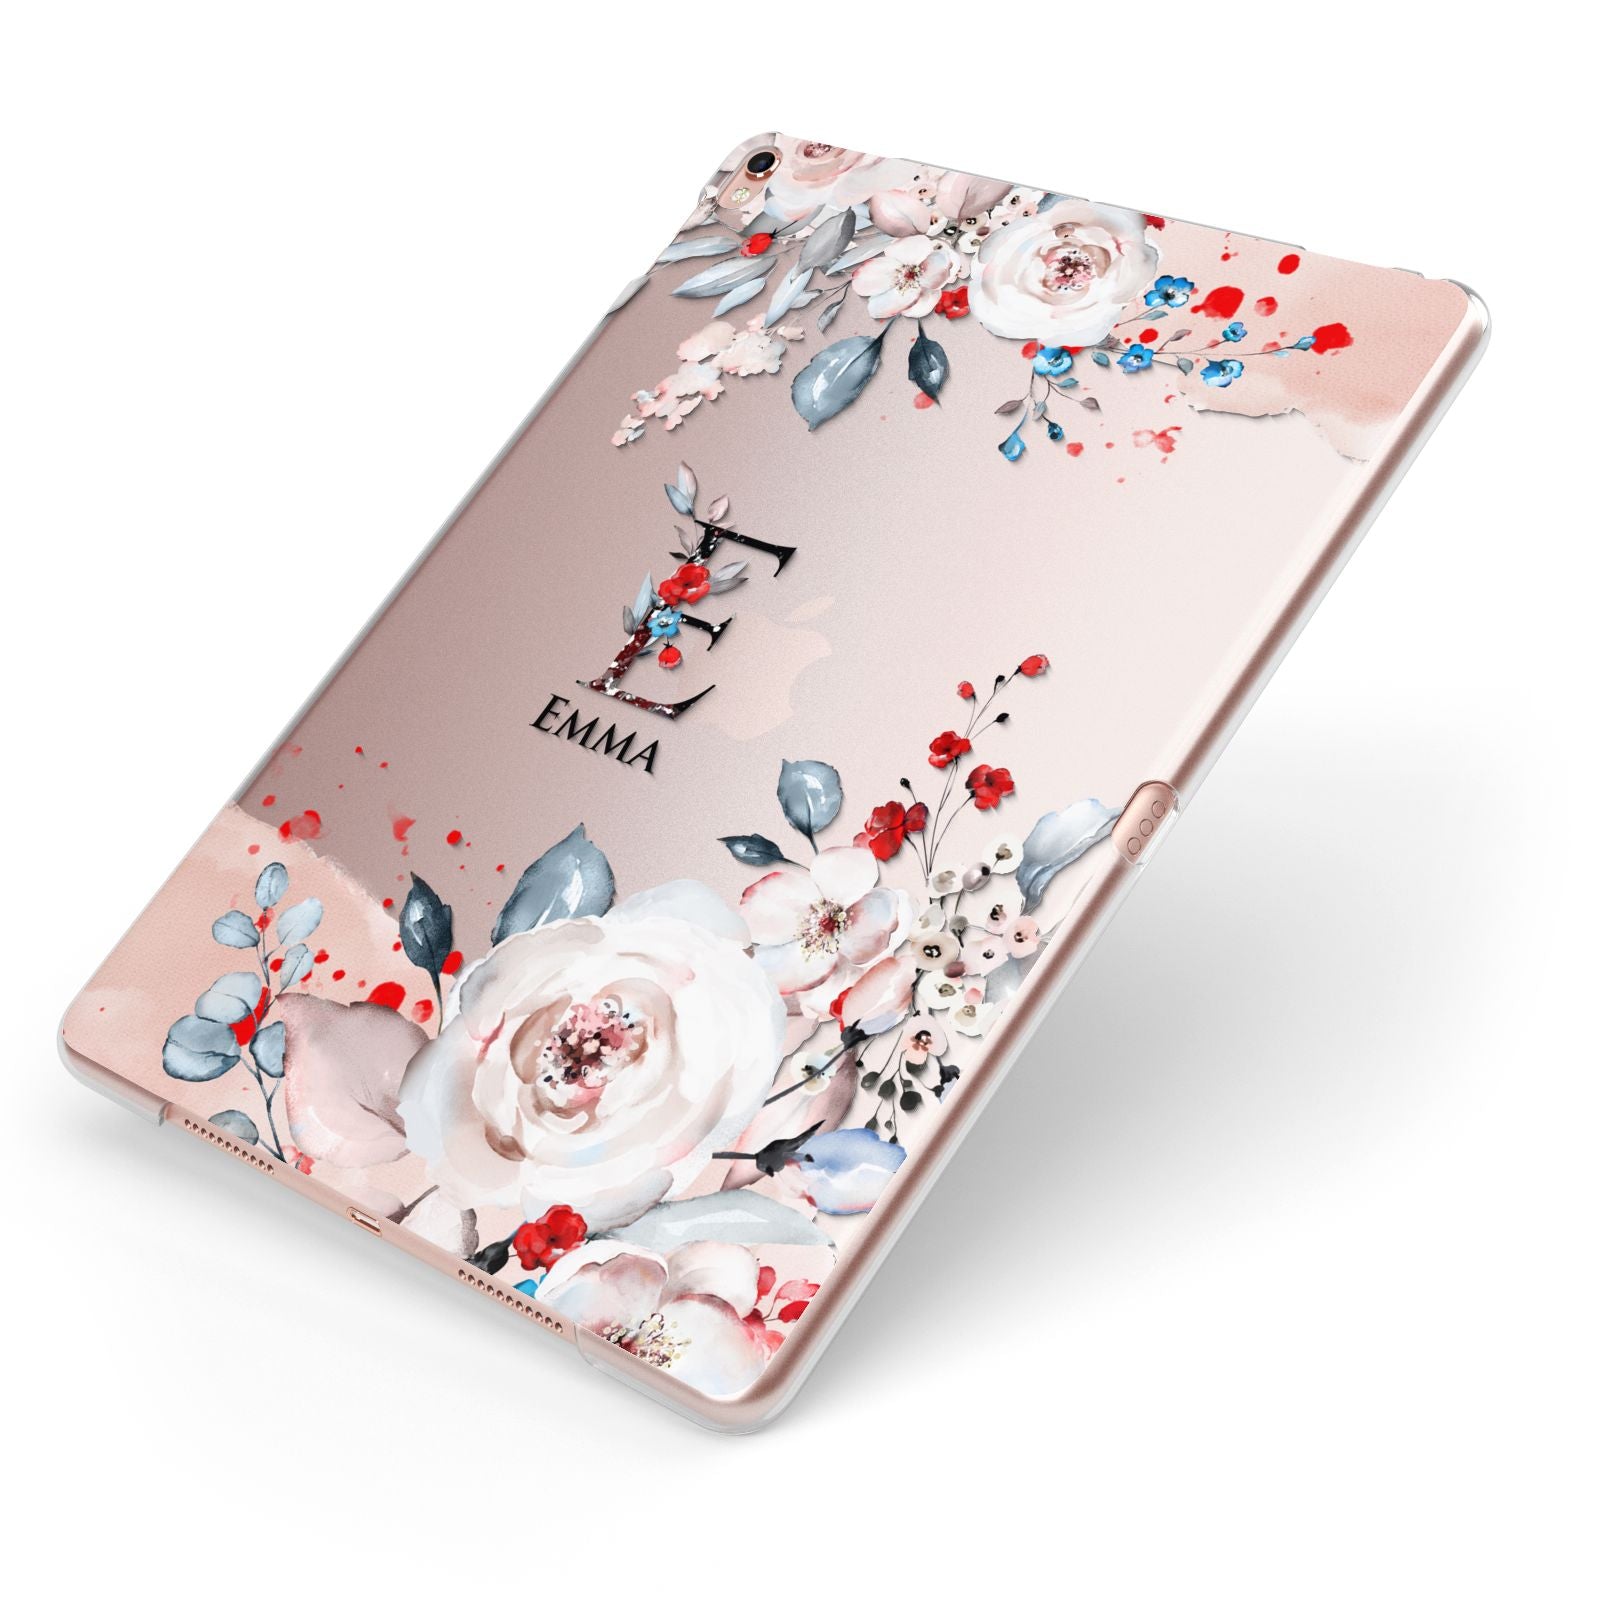 Monogrammed Roses Floral Wreath Apple iPad Case on Rose Gold iPad Side View